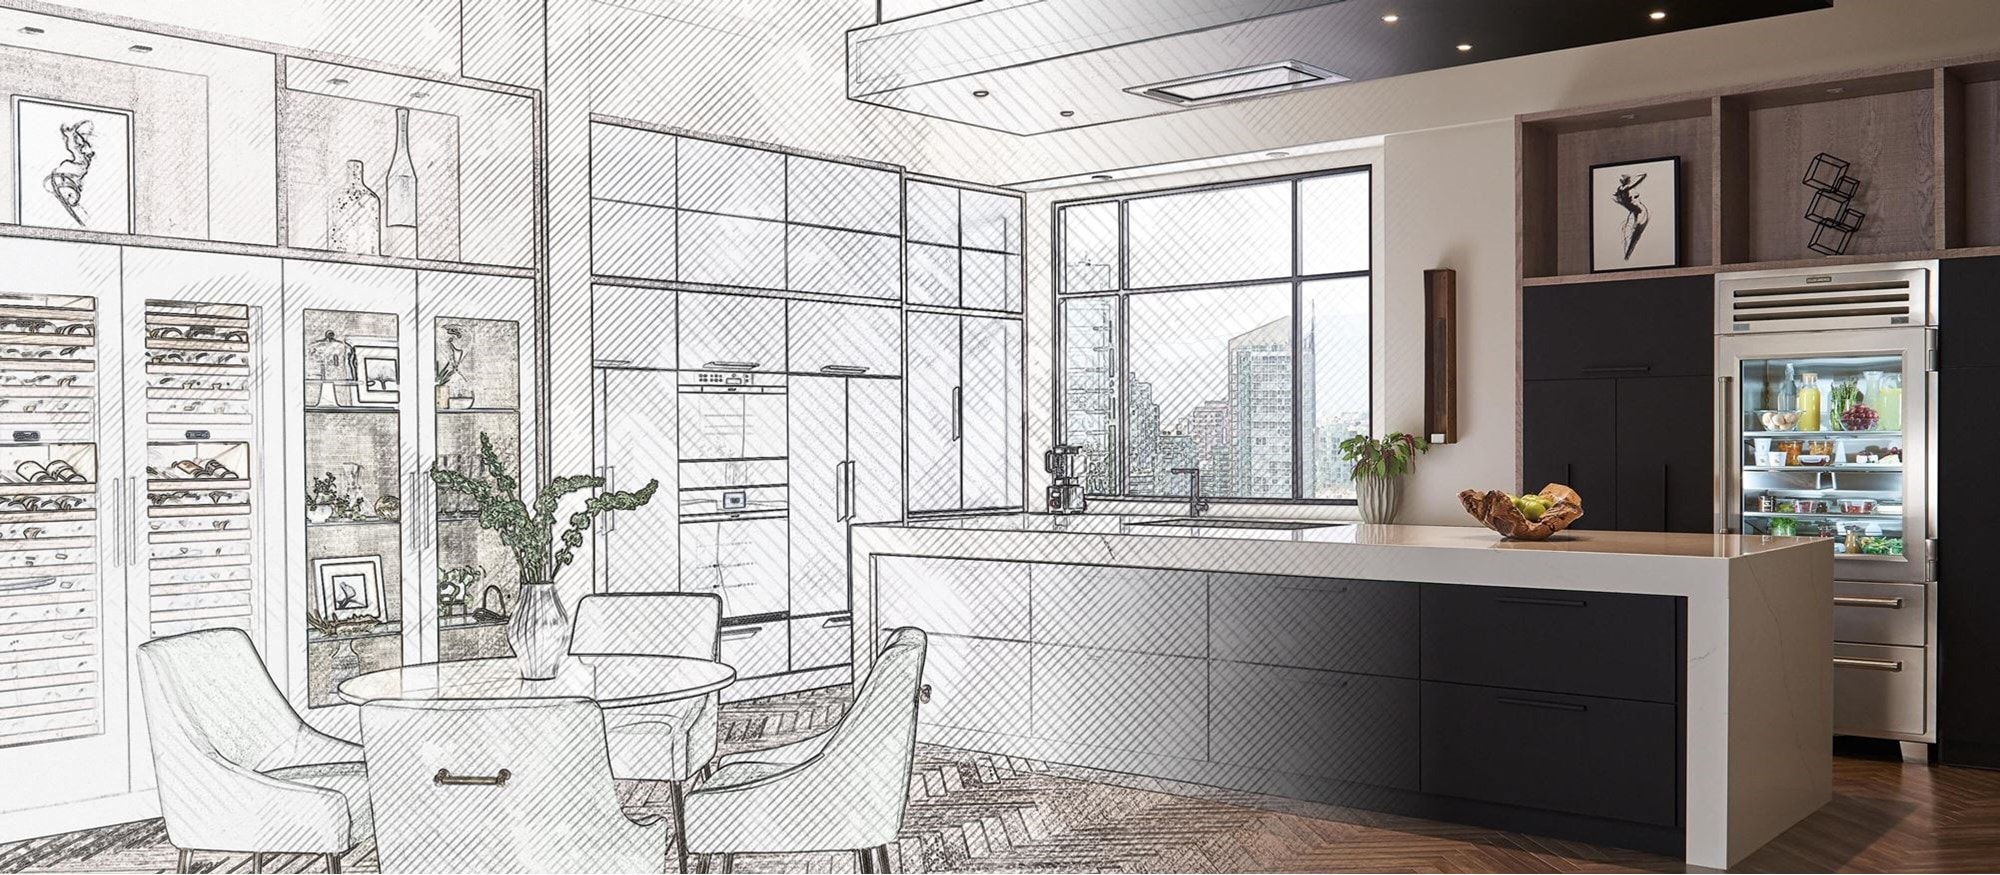 Experience the efficiency of hassle-free, accurate Reveal Cabinetry Specifications with our intuitive, industry-first product configuration tool.